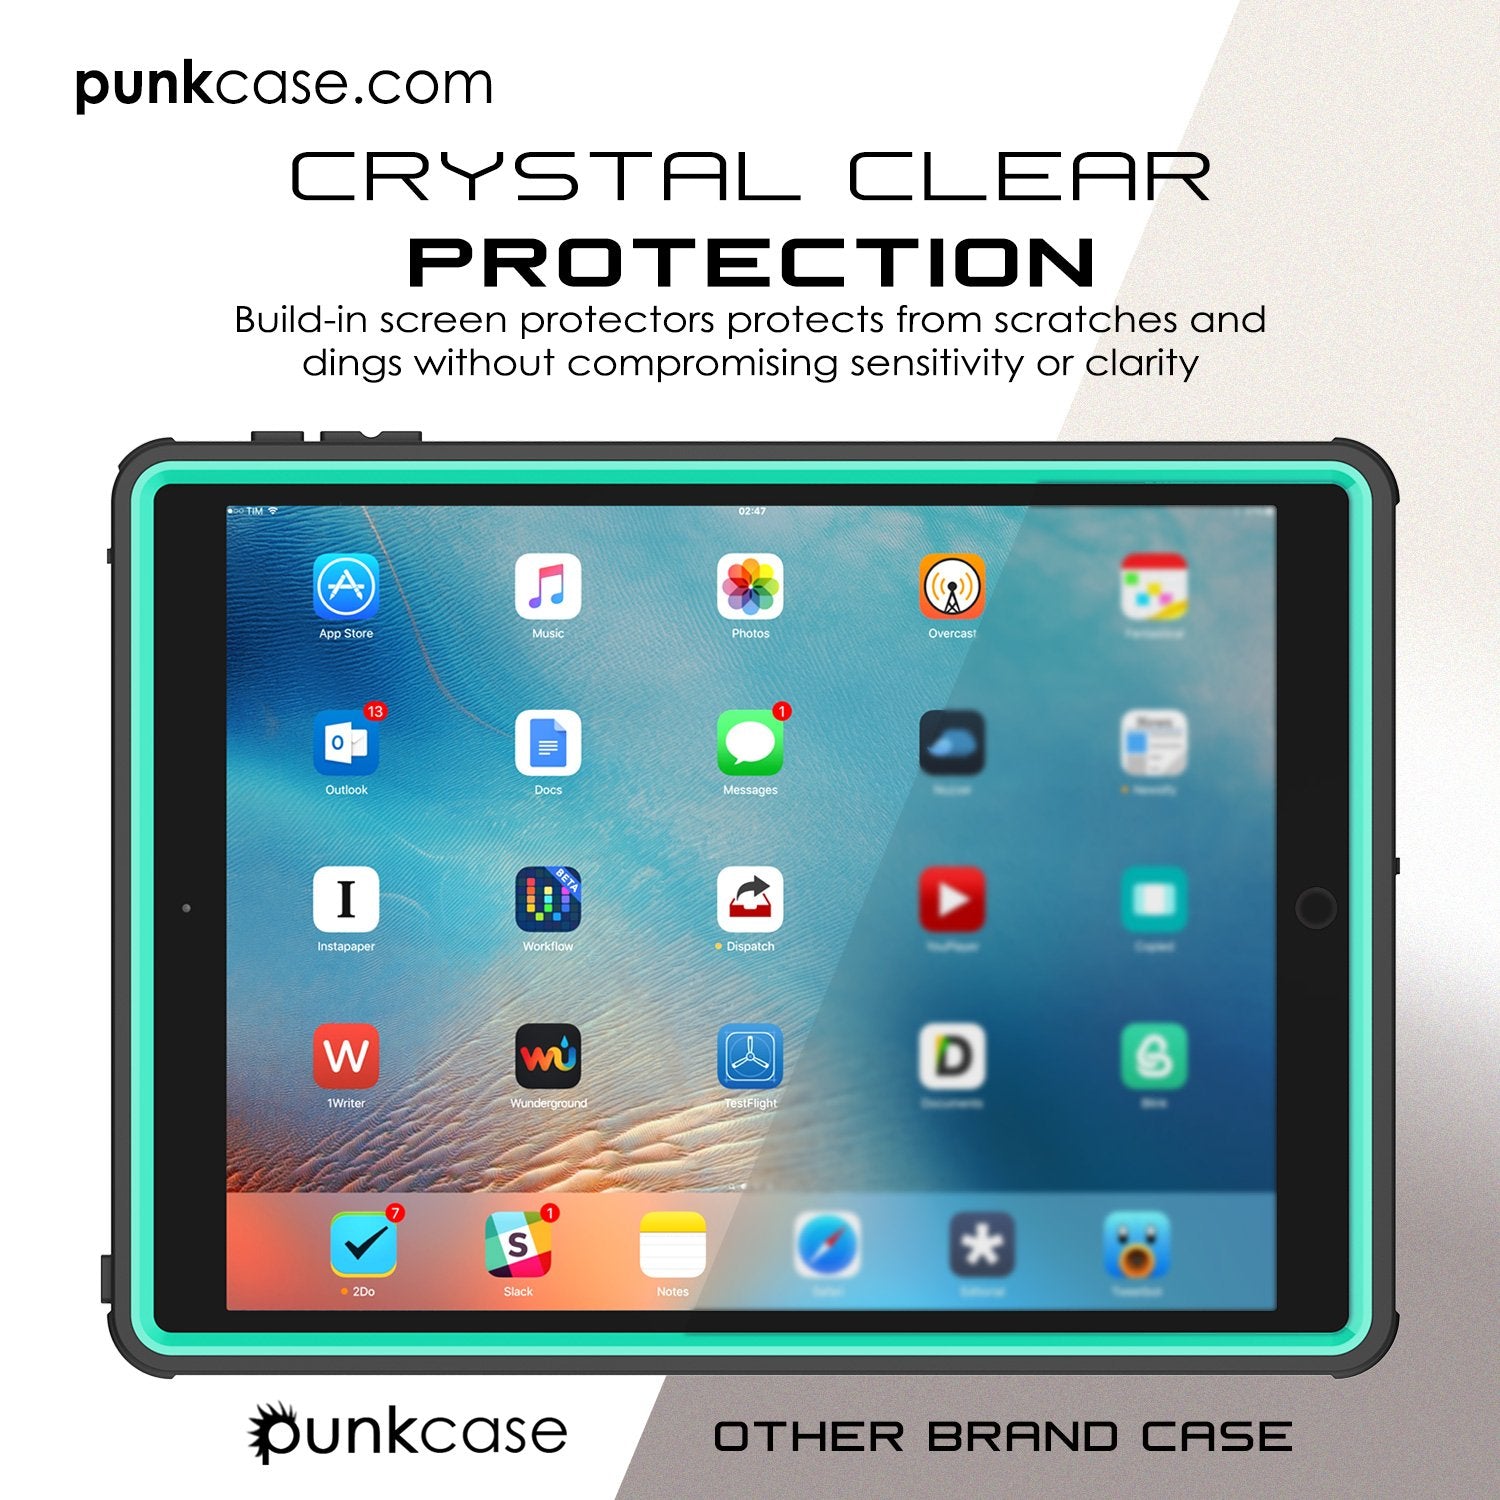 Punkcase iPad Pro 9.7 Case [CRYSTAL Series], Waterproof, Ultra-Thin Cover [Shockproof] [Dustproof] with Built-in Screen Protector [Teal]